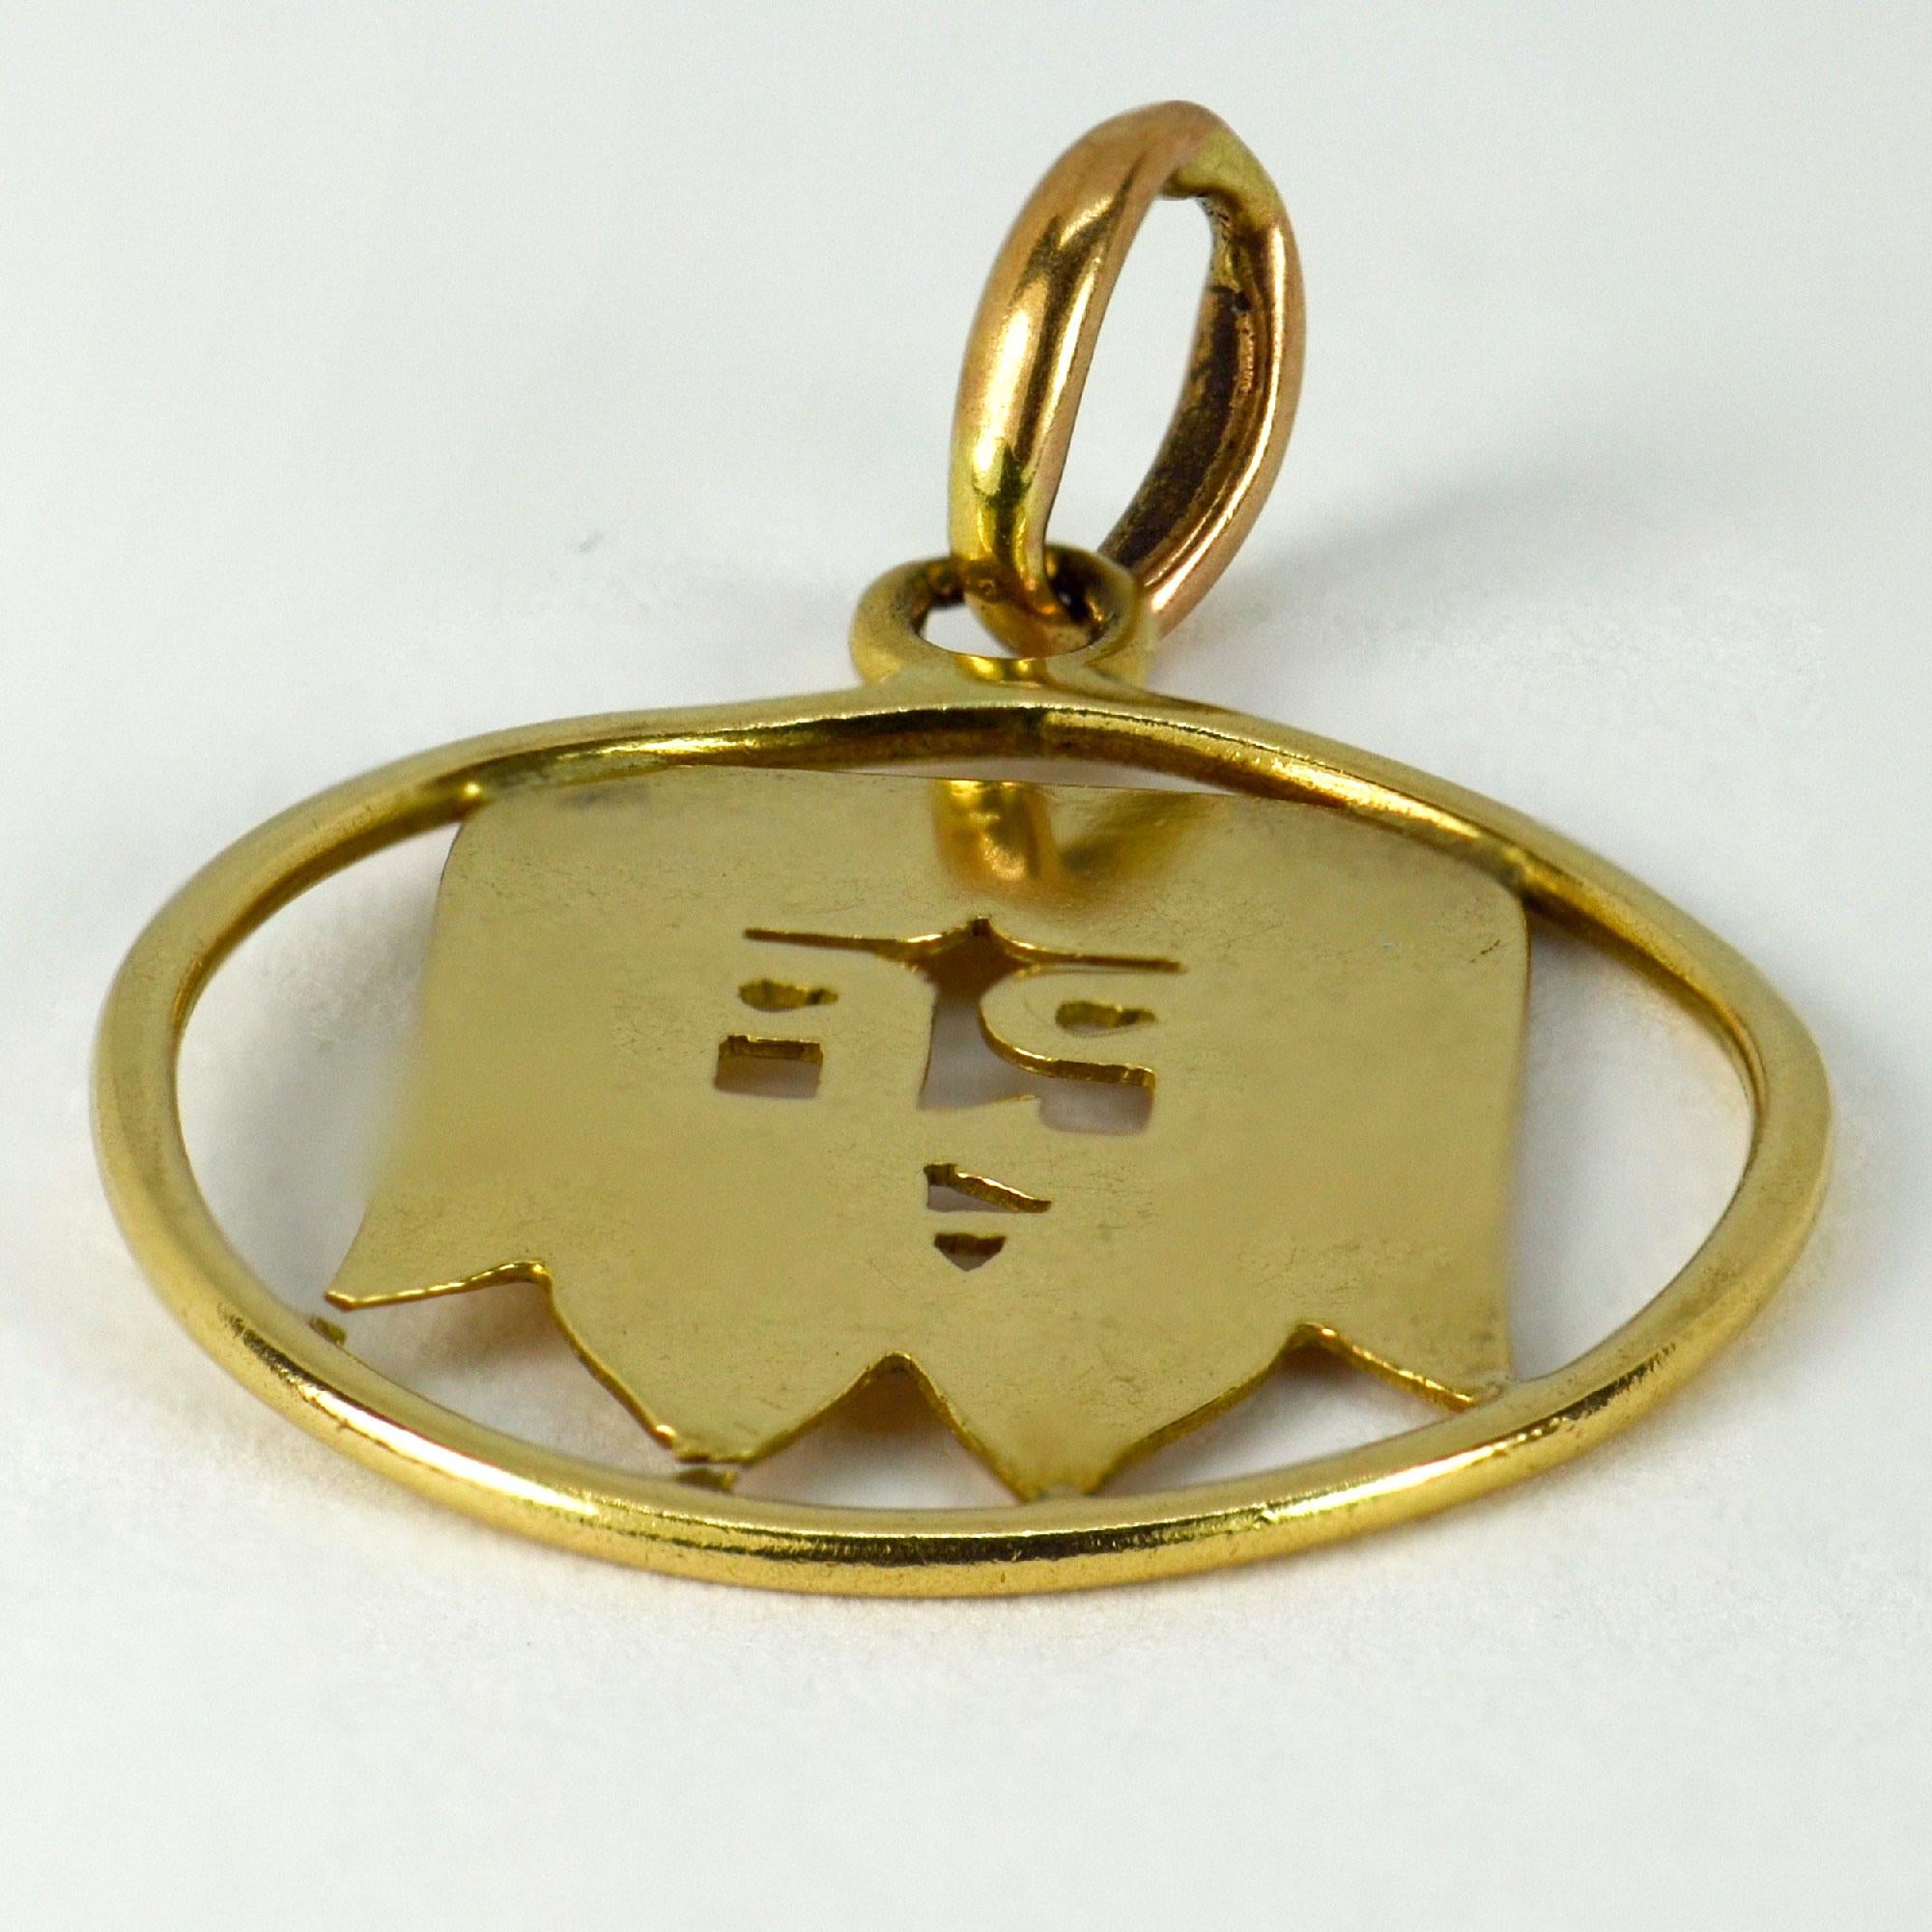 A French 18 karat (18K) yellow gold charm pendant designed as a pierced depiction of the face of Jesus. Stamped with the owl poincon for 18 karat gold and French import. 

Dimensions: 2.1 x 1.8 x 0.1 cm (not including jump ring)
Weight: 1.31 grams
